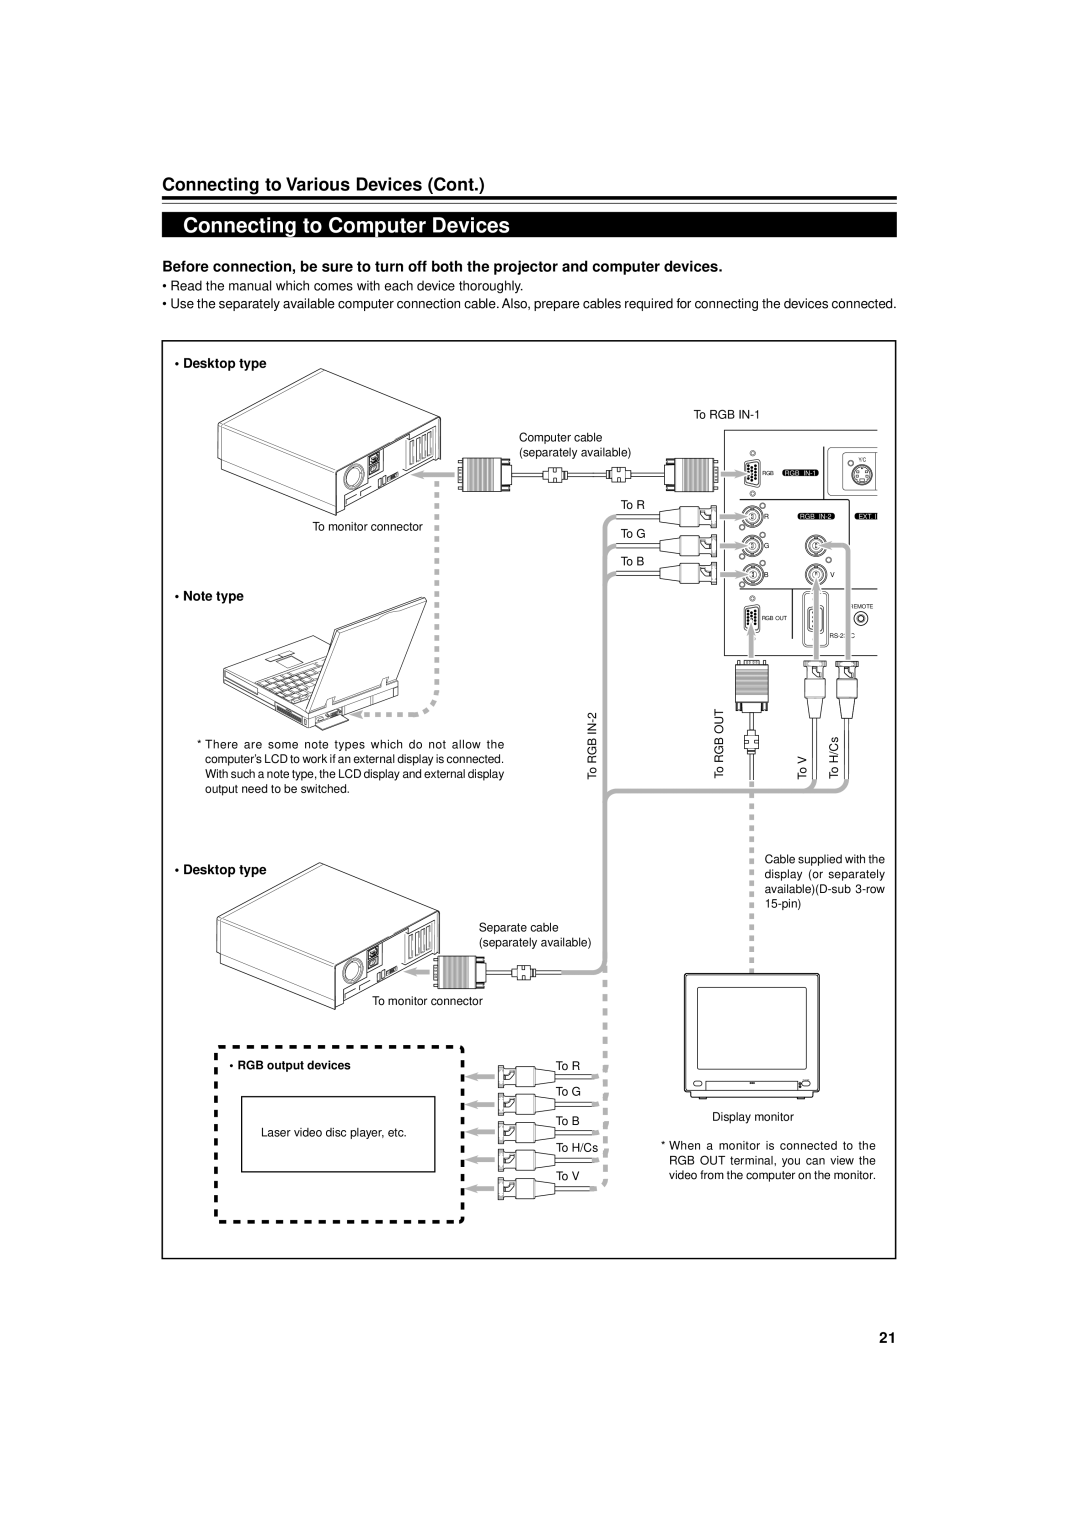 JVC DLA-M5000LU, DLA-M5000SCU manual Connecting to Computer Devices, Desktop type, Note type, RGB output devices 